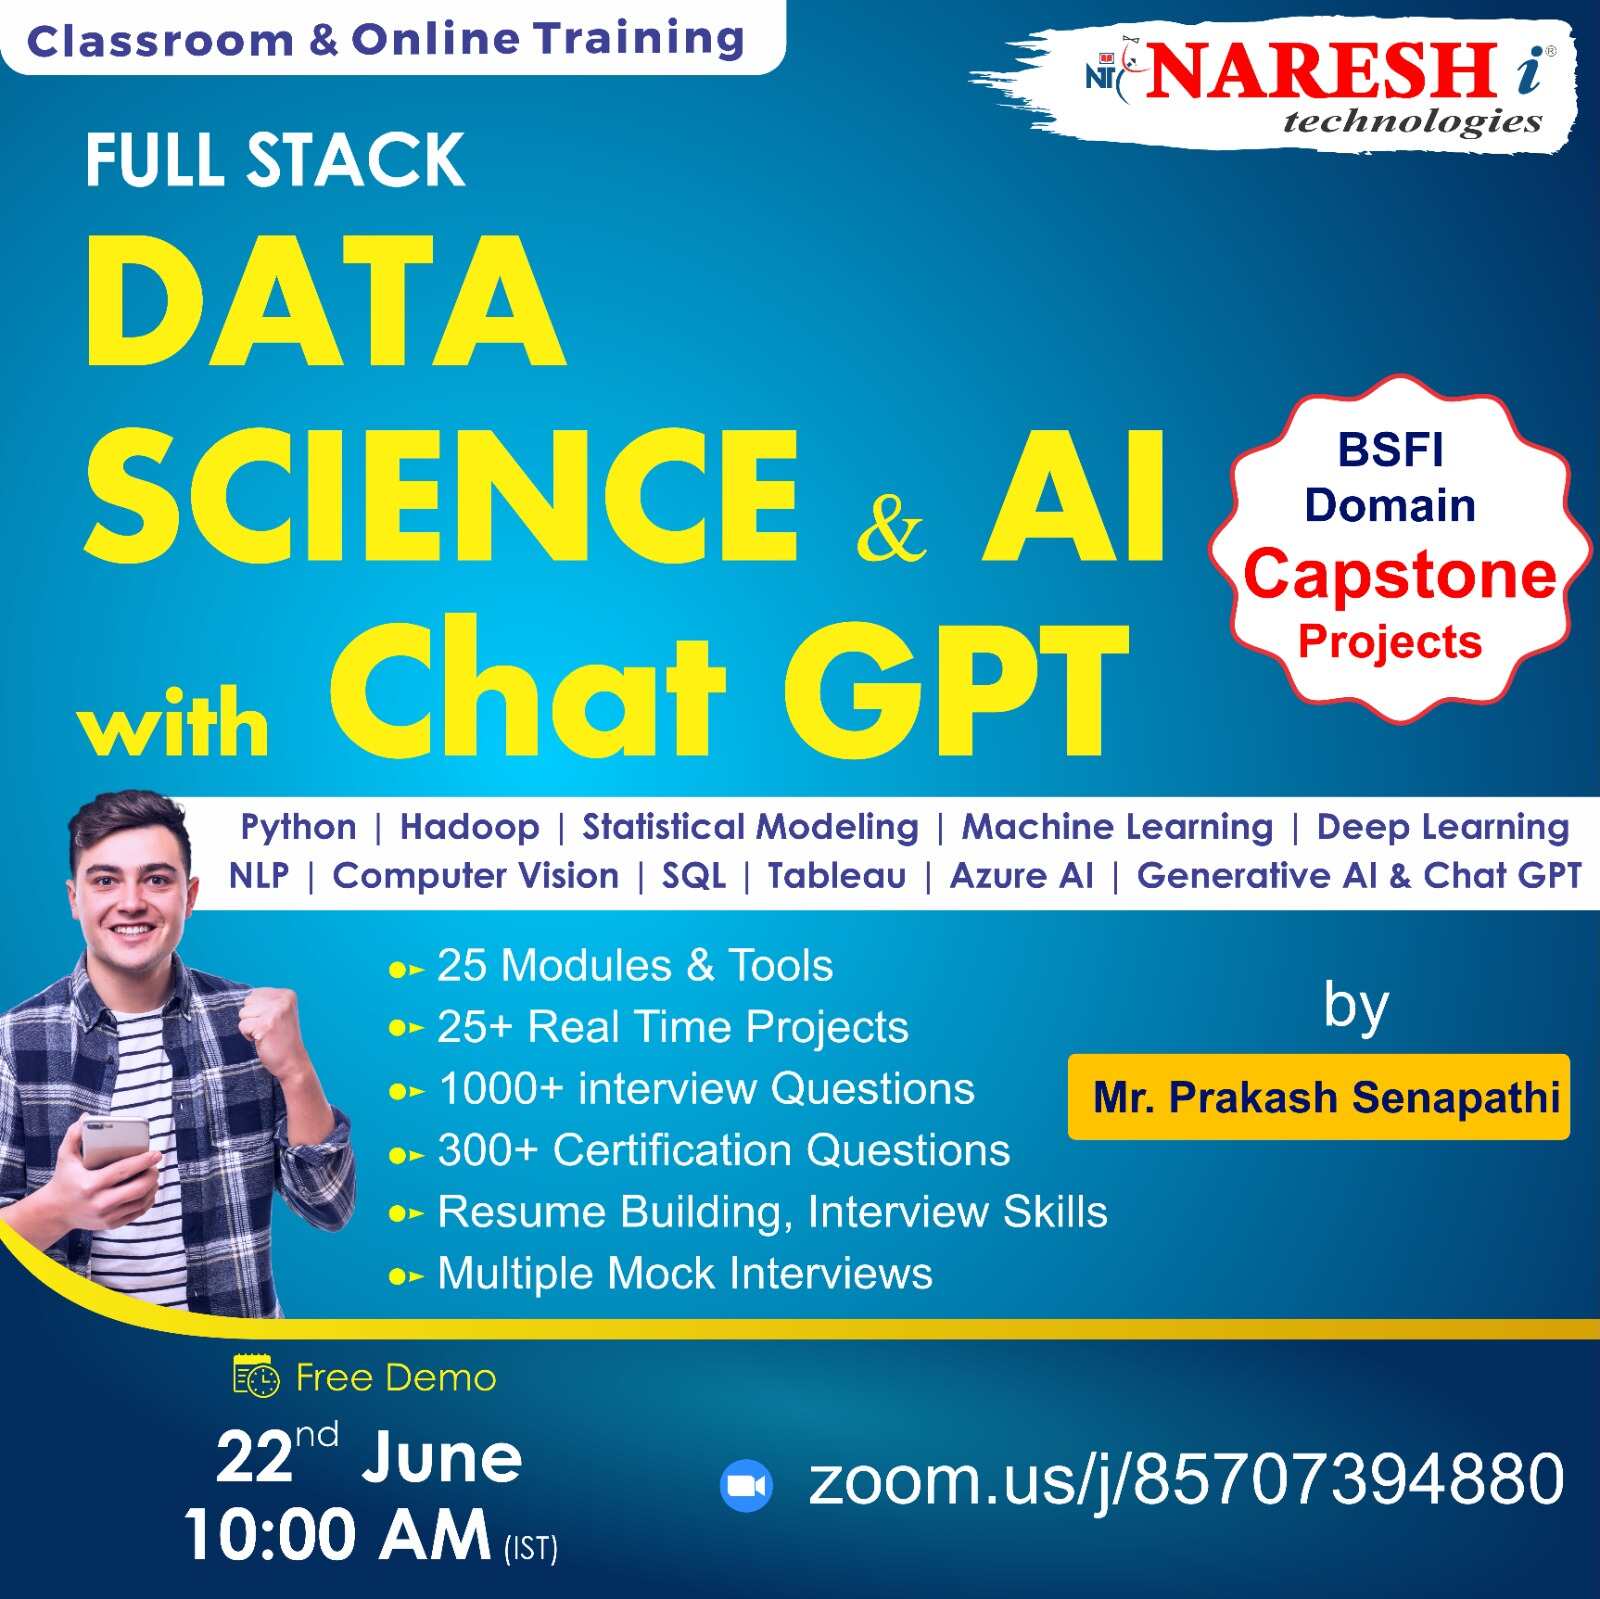 Free Demo On Full Stack Data Science & AI with Chat GPT - NareshIT, Online Event